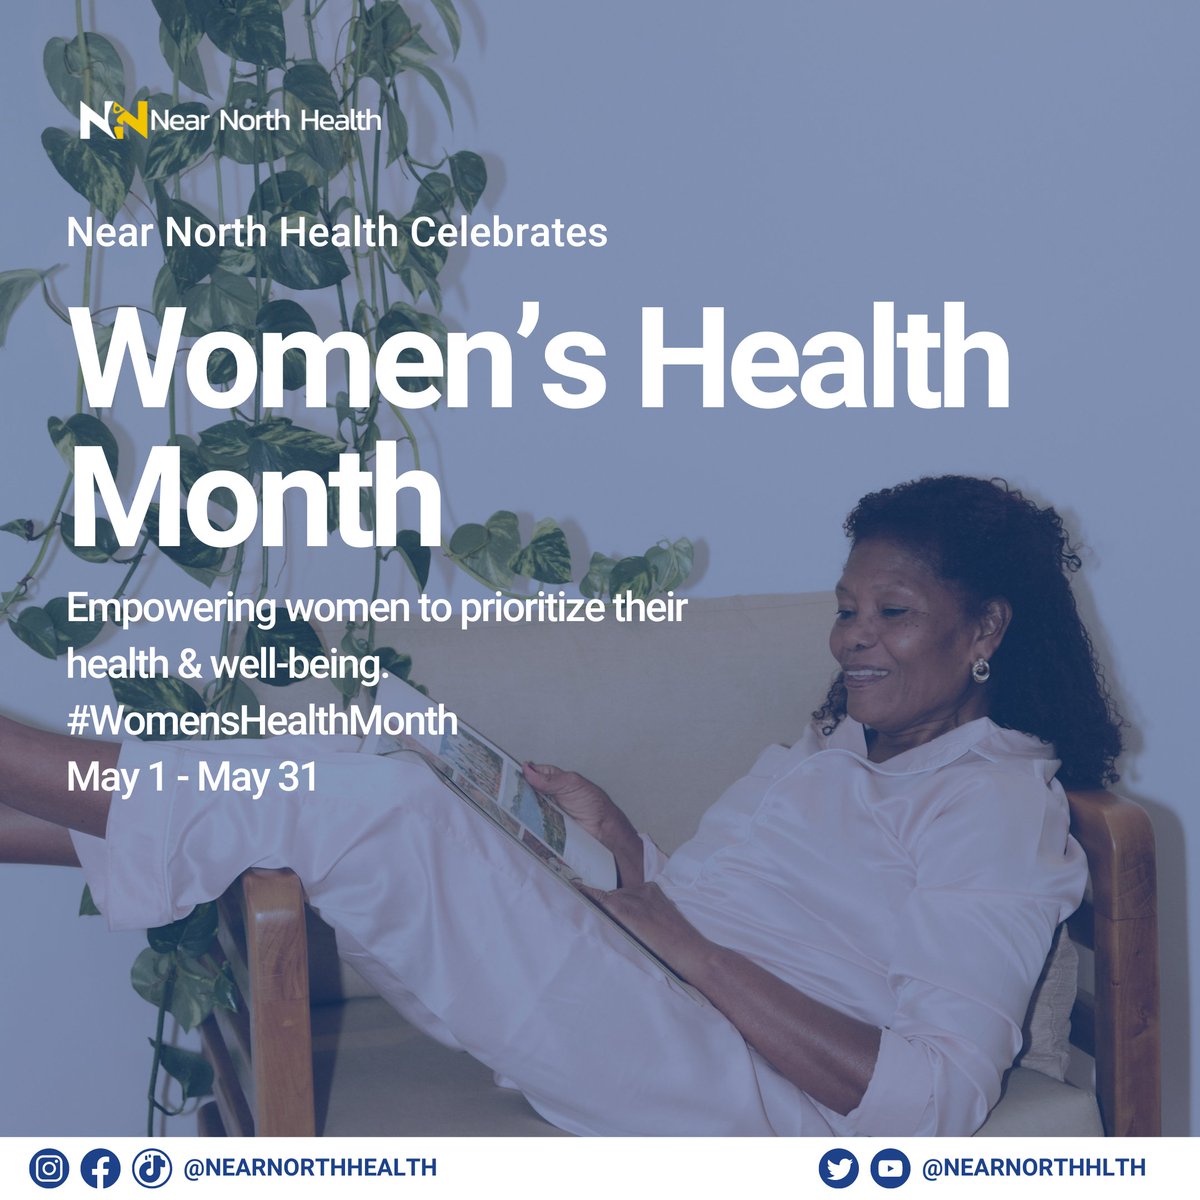 🌸 Celebrate Women's Health Month with us! 🌸 Throughout May, we're sharing tips & resources to empower women's wellness. From preventive care to mental health, join us in prioritizing your well-being. #WomensHealthMonth #HealthyWomen #NearNorthHealth #Empowerment